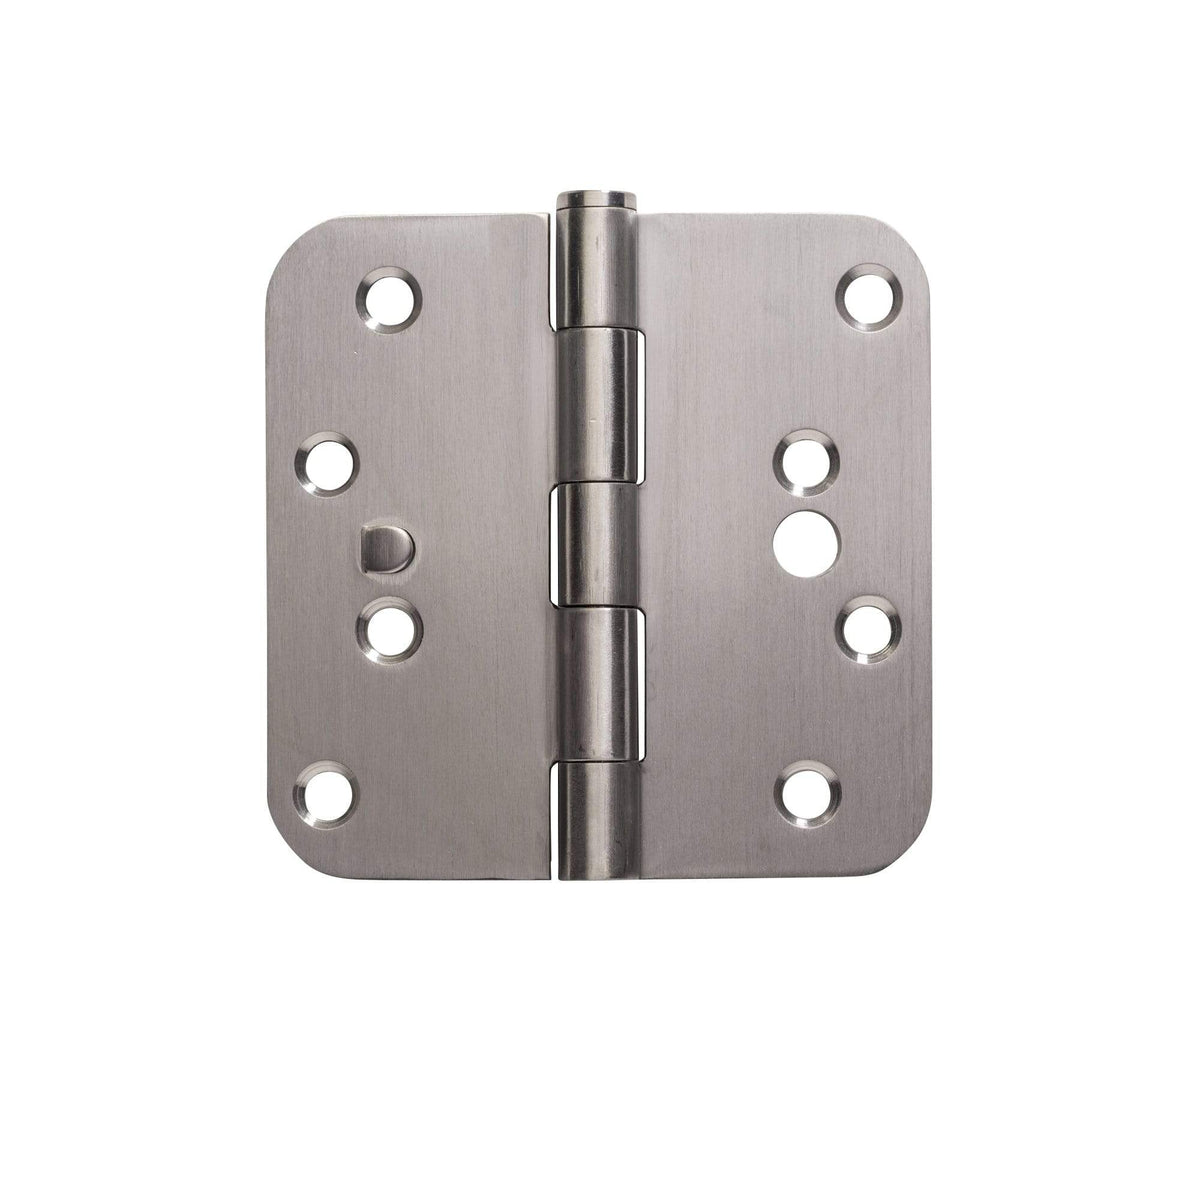 Stainless Steel Hinges With Security Tab - 4" X 4" Plain Bearing Hinge With 5/8" Radius Corners - Sold In Pairs